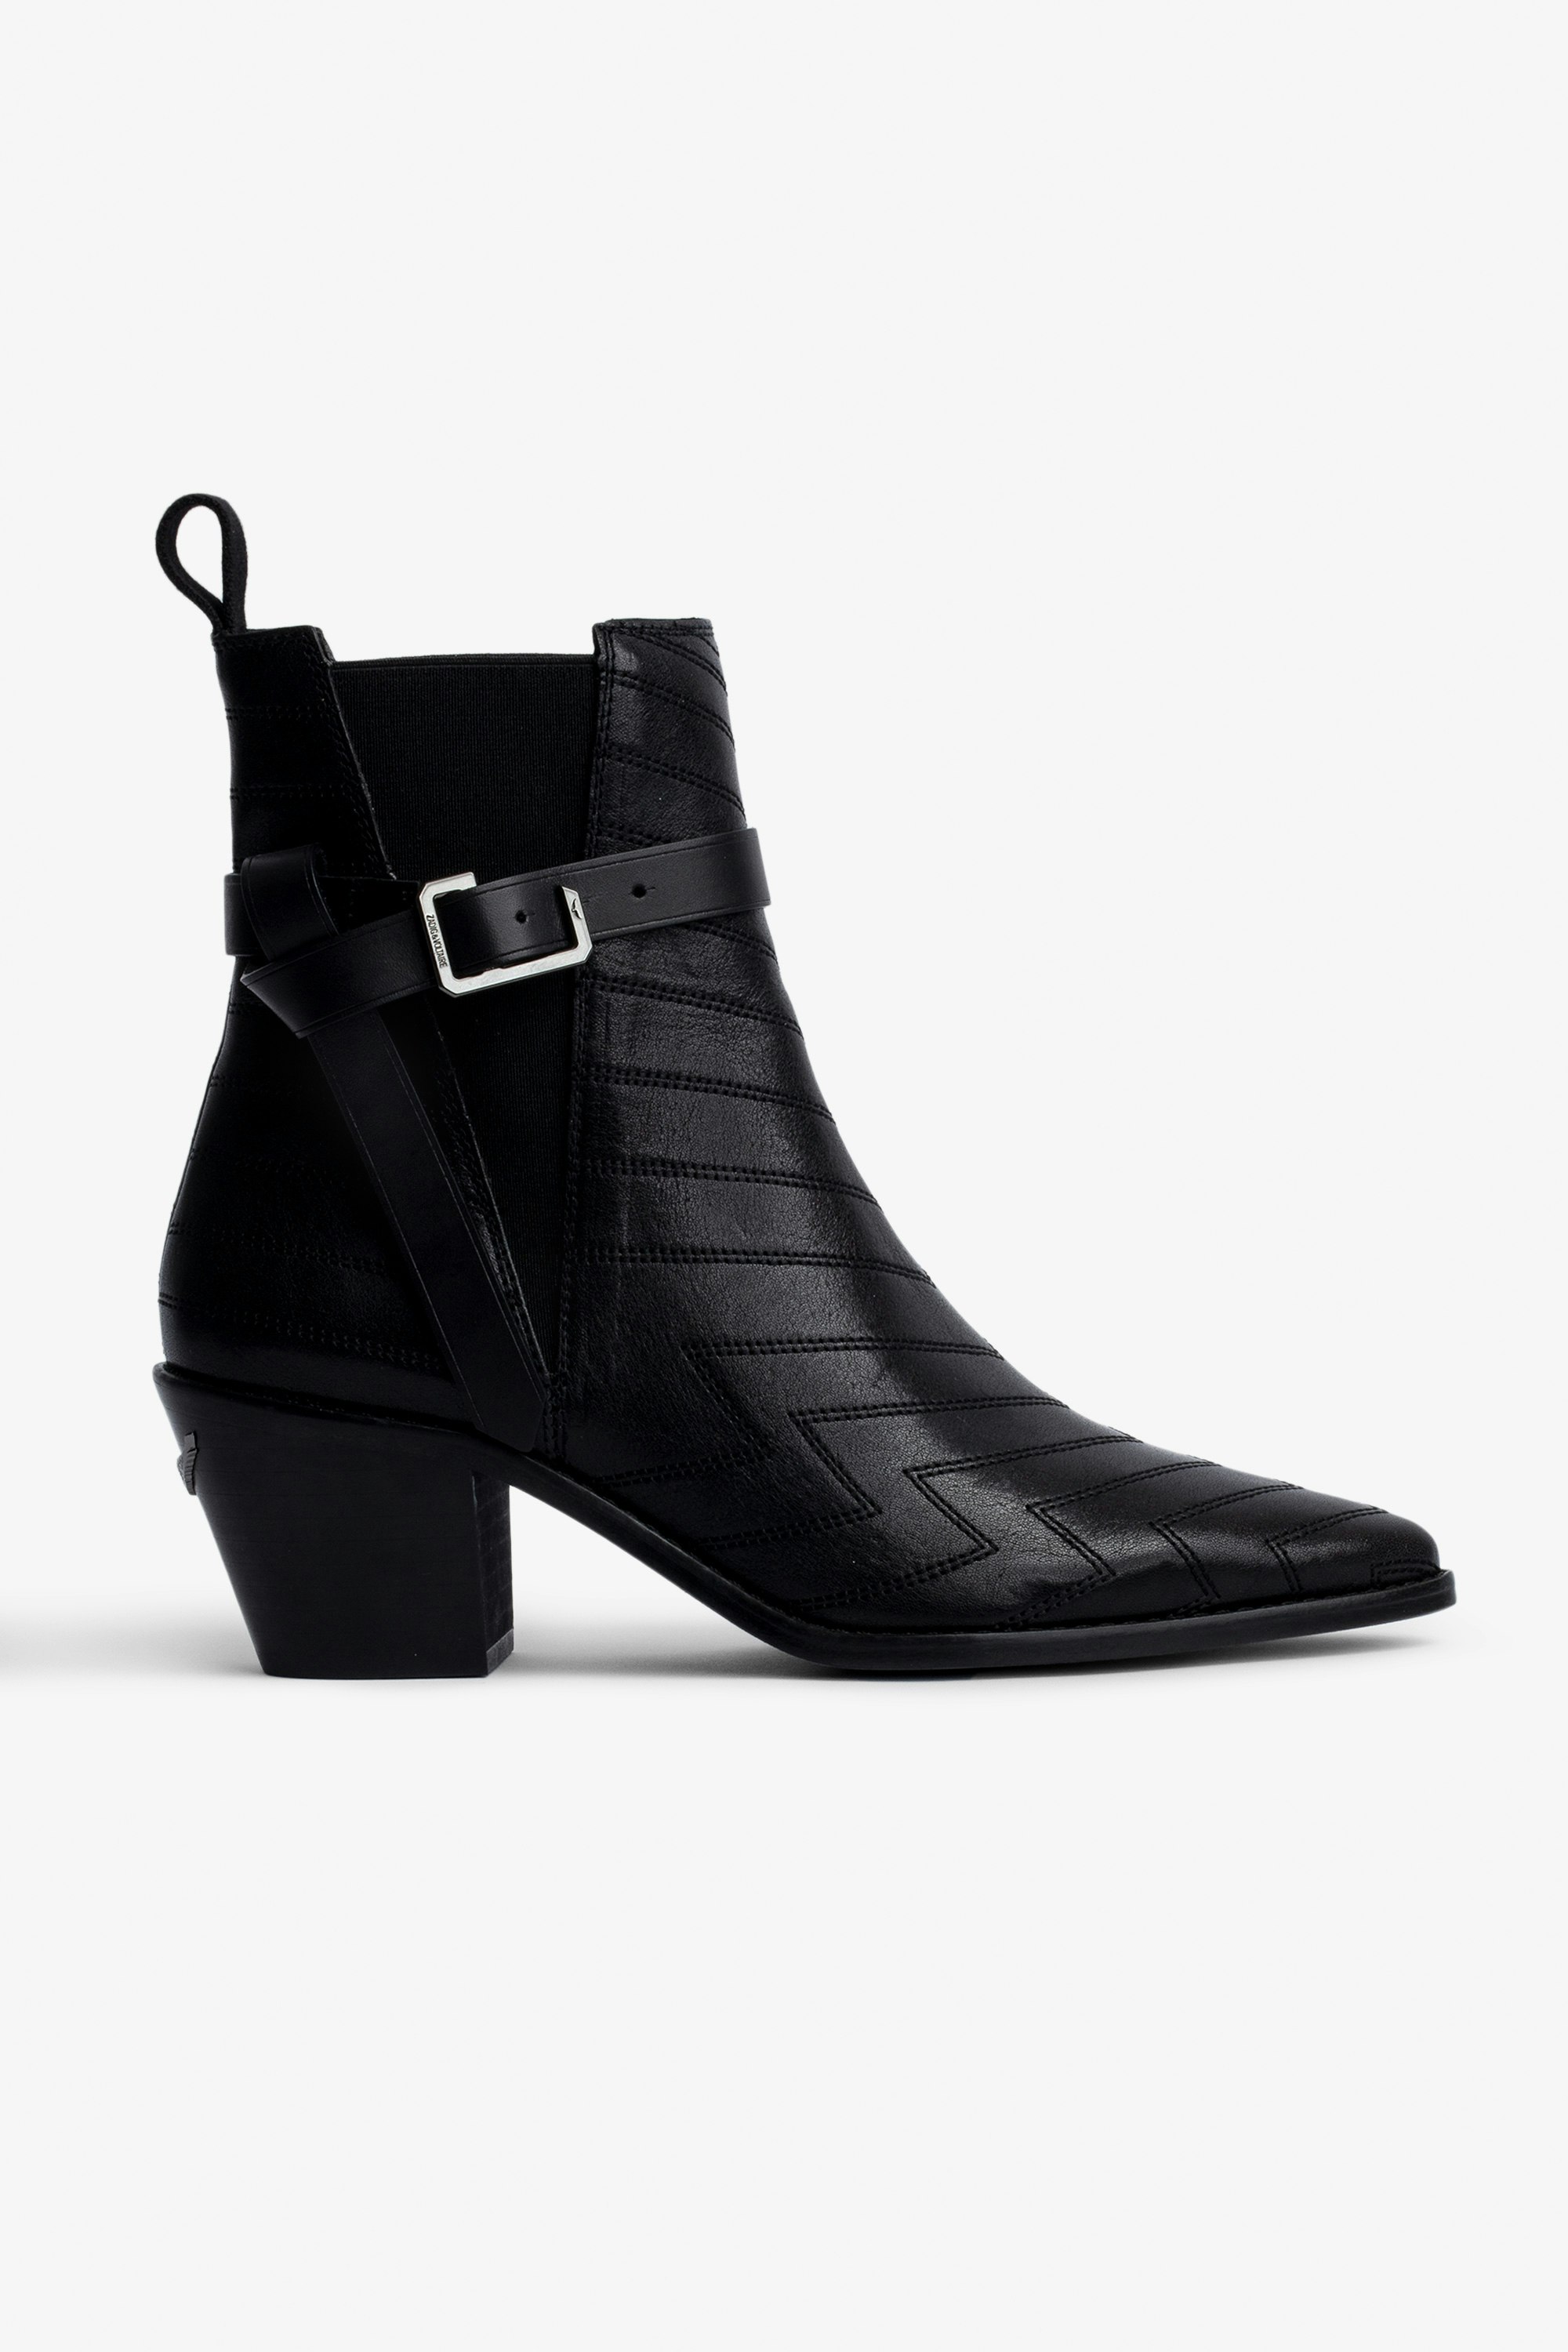 Tyler Ankle Boots Women’s black leather ankle boots with topstitching and adjustable strap